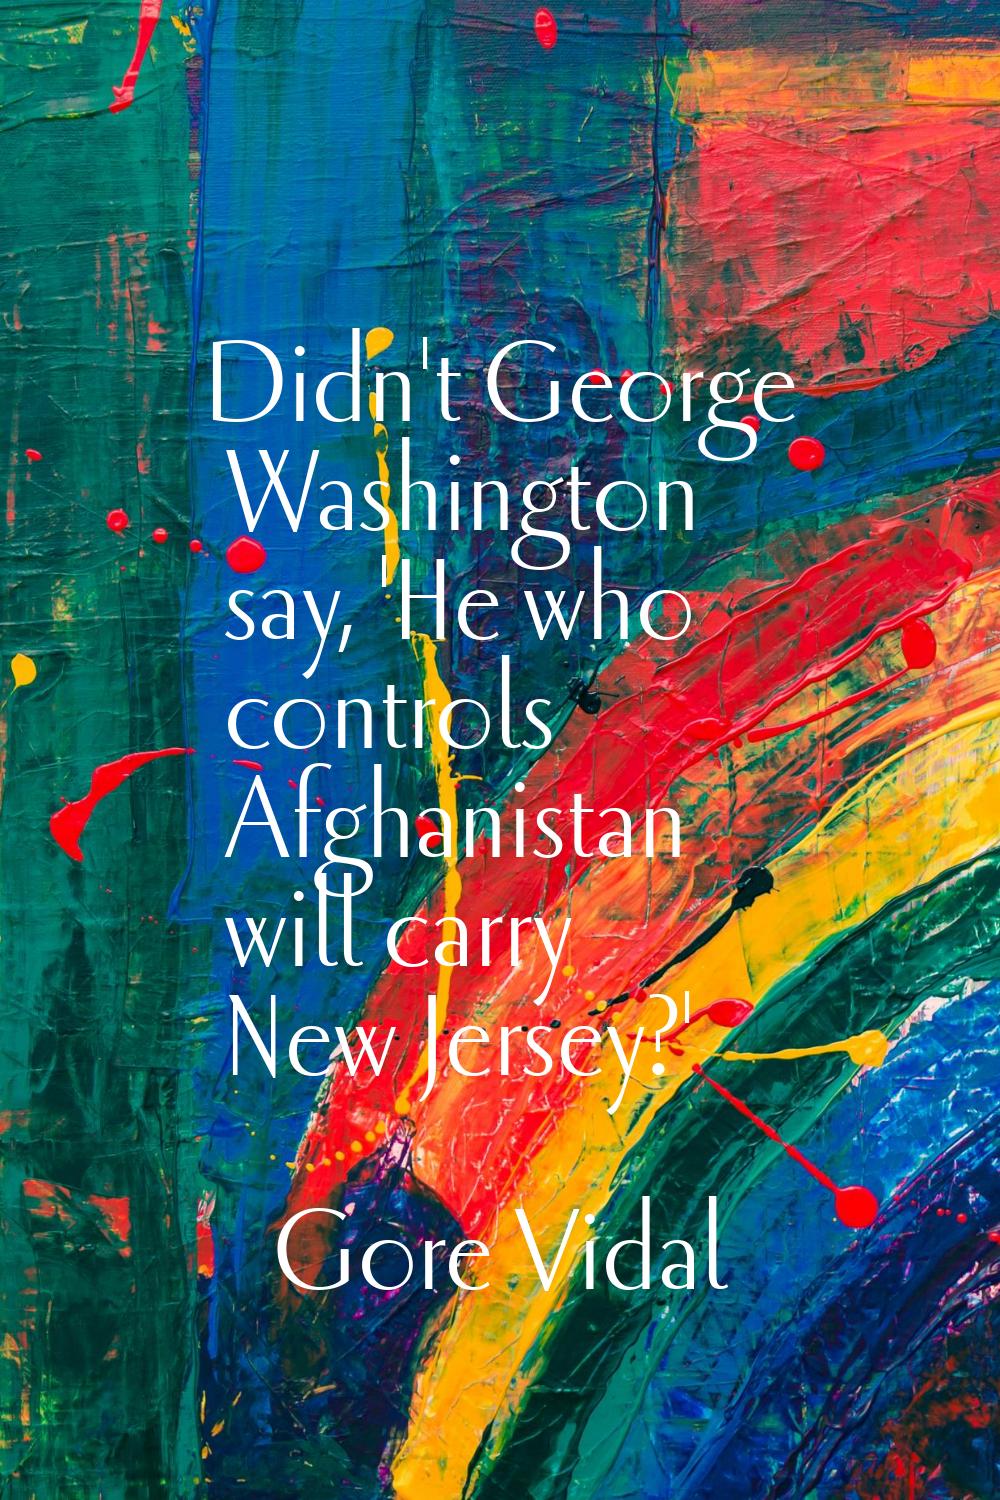 Didn't George Washington say, 'He who controls Afghanistan will carry New Jersey?'